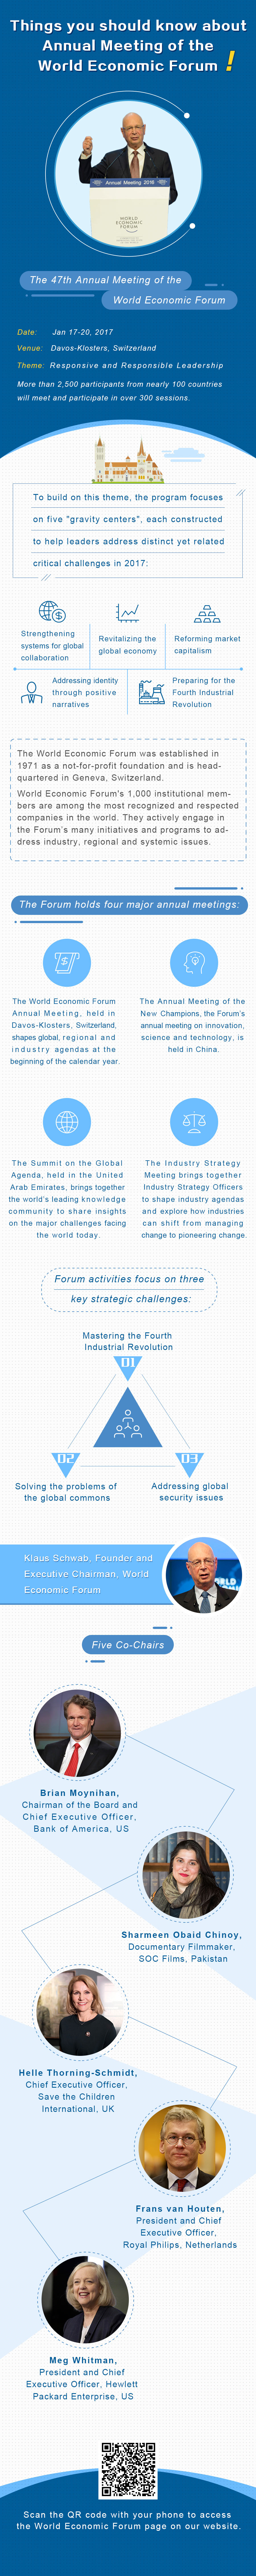 Things you should know about Annual Meeting of the World Economic Forum